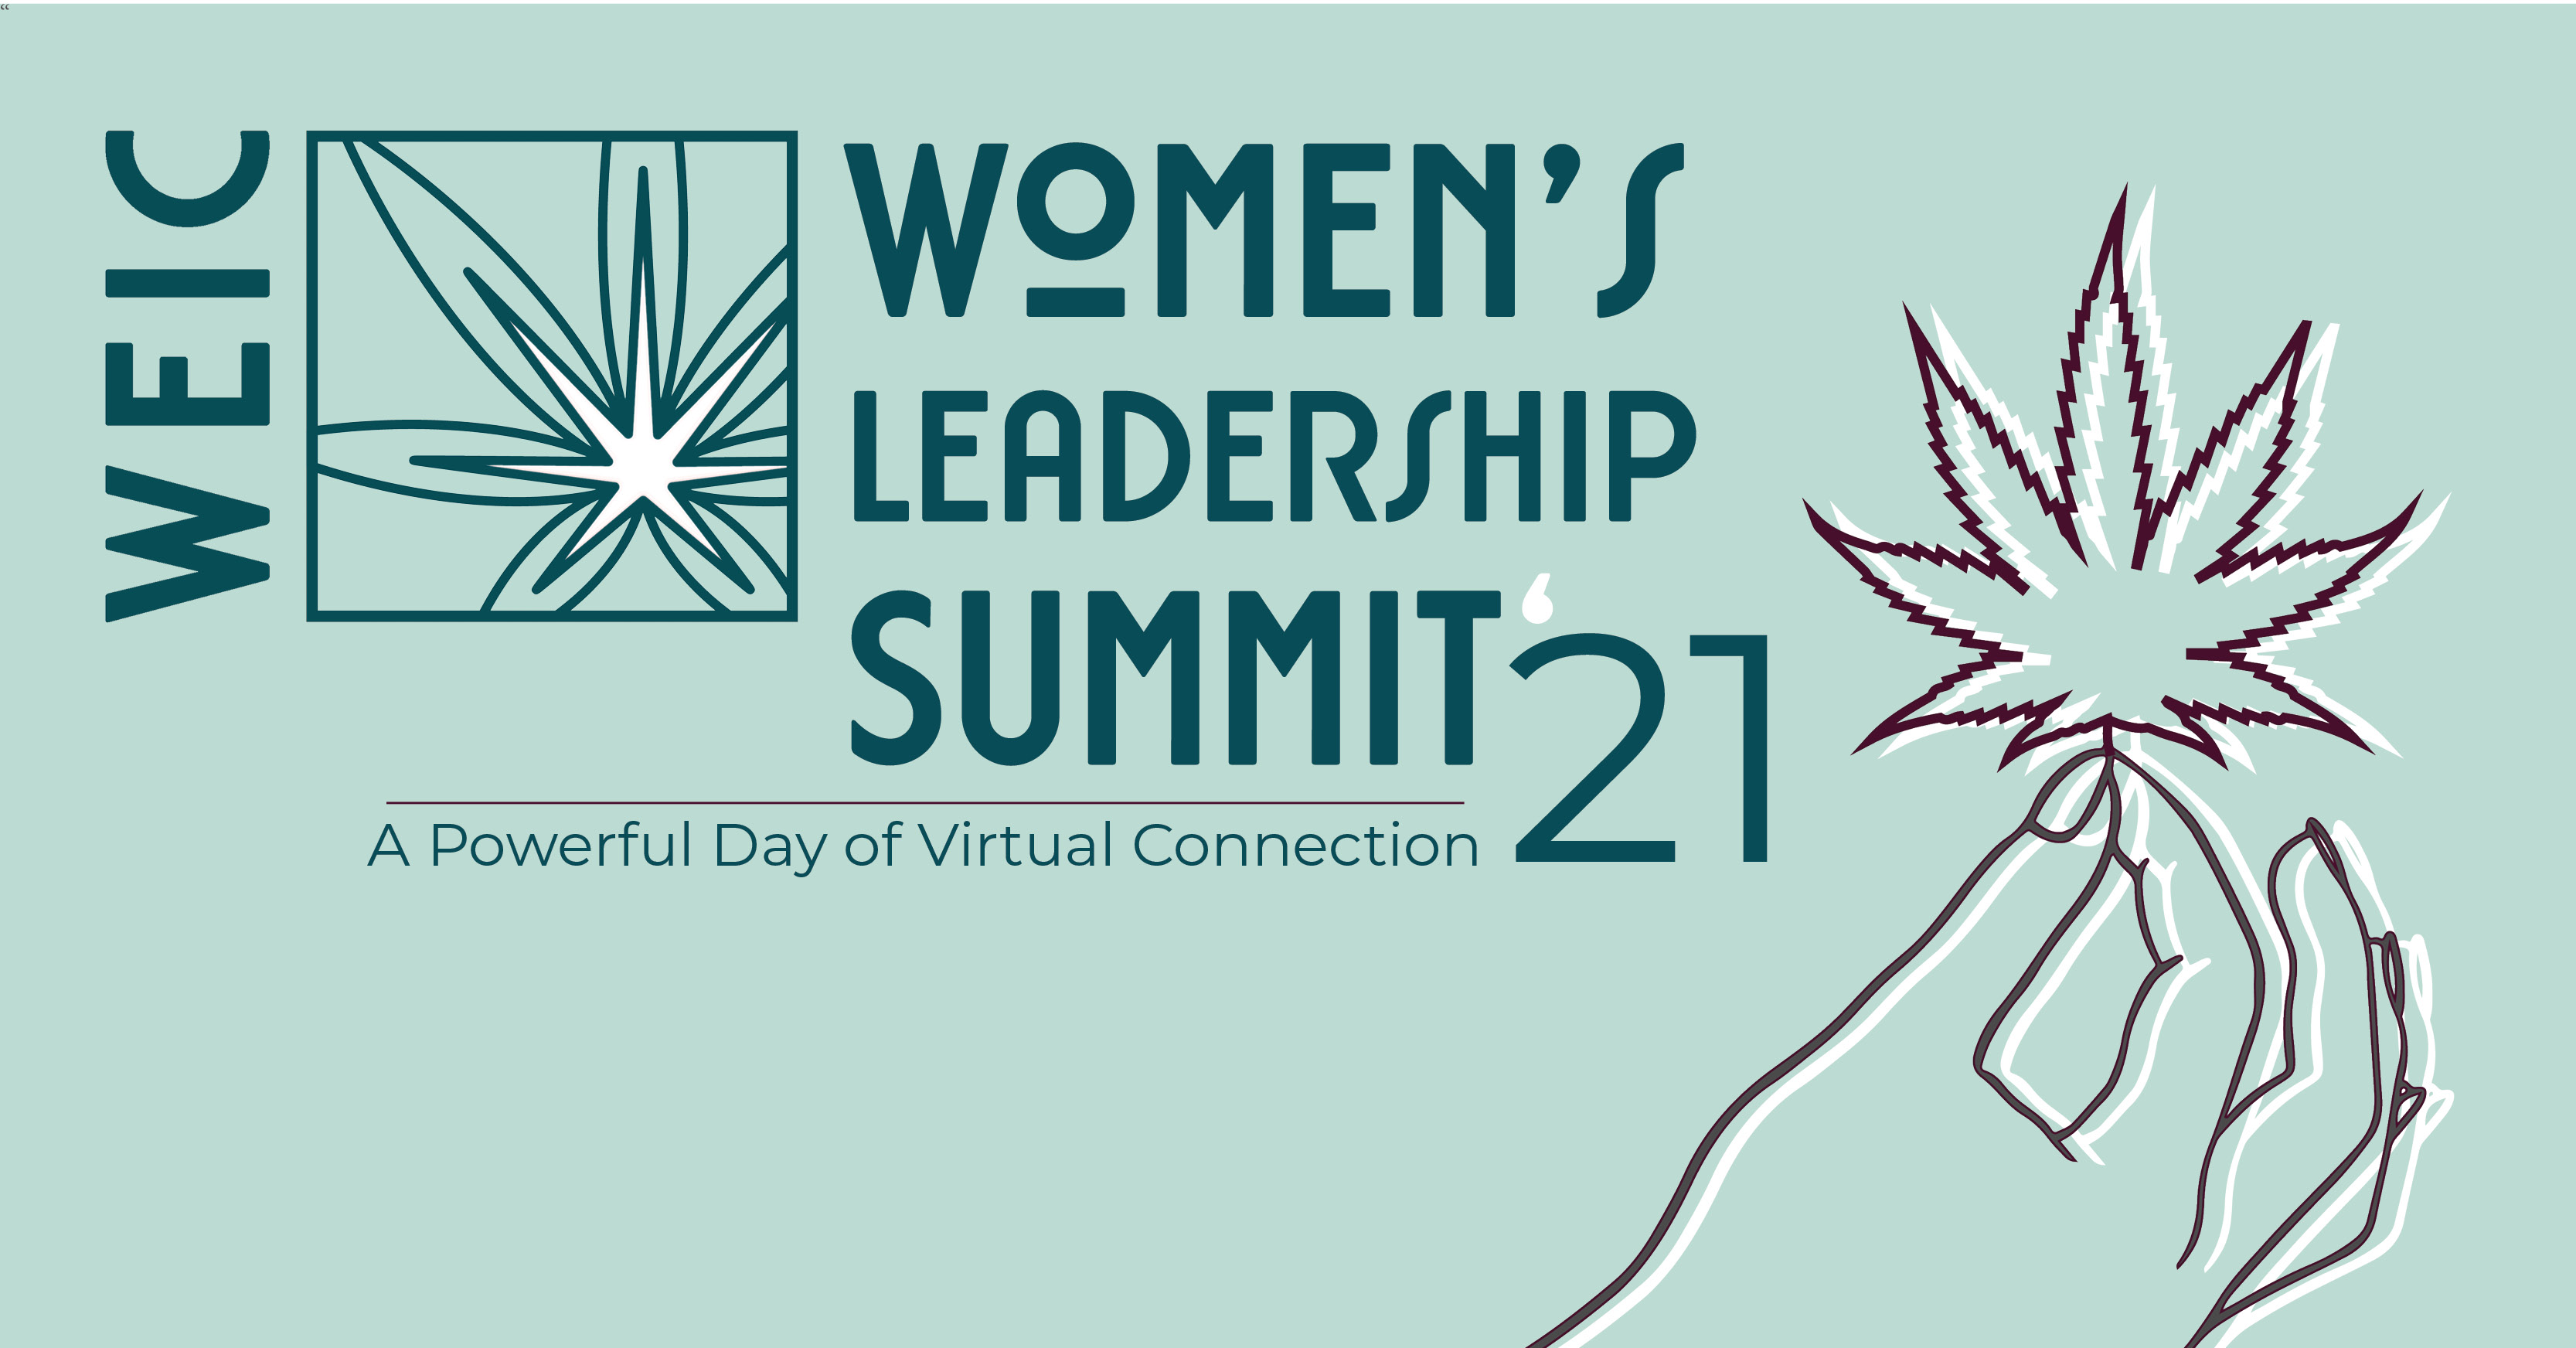 EventHi Women’s Leadership Summit Power and Collaboration